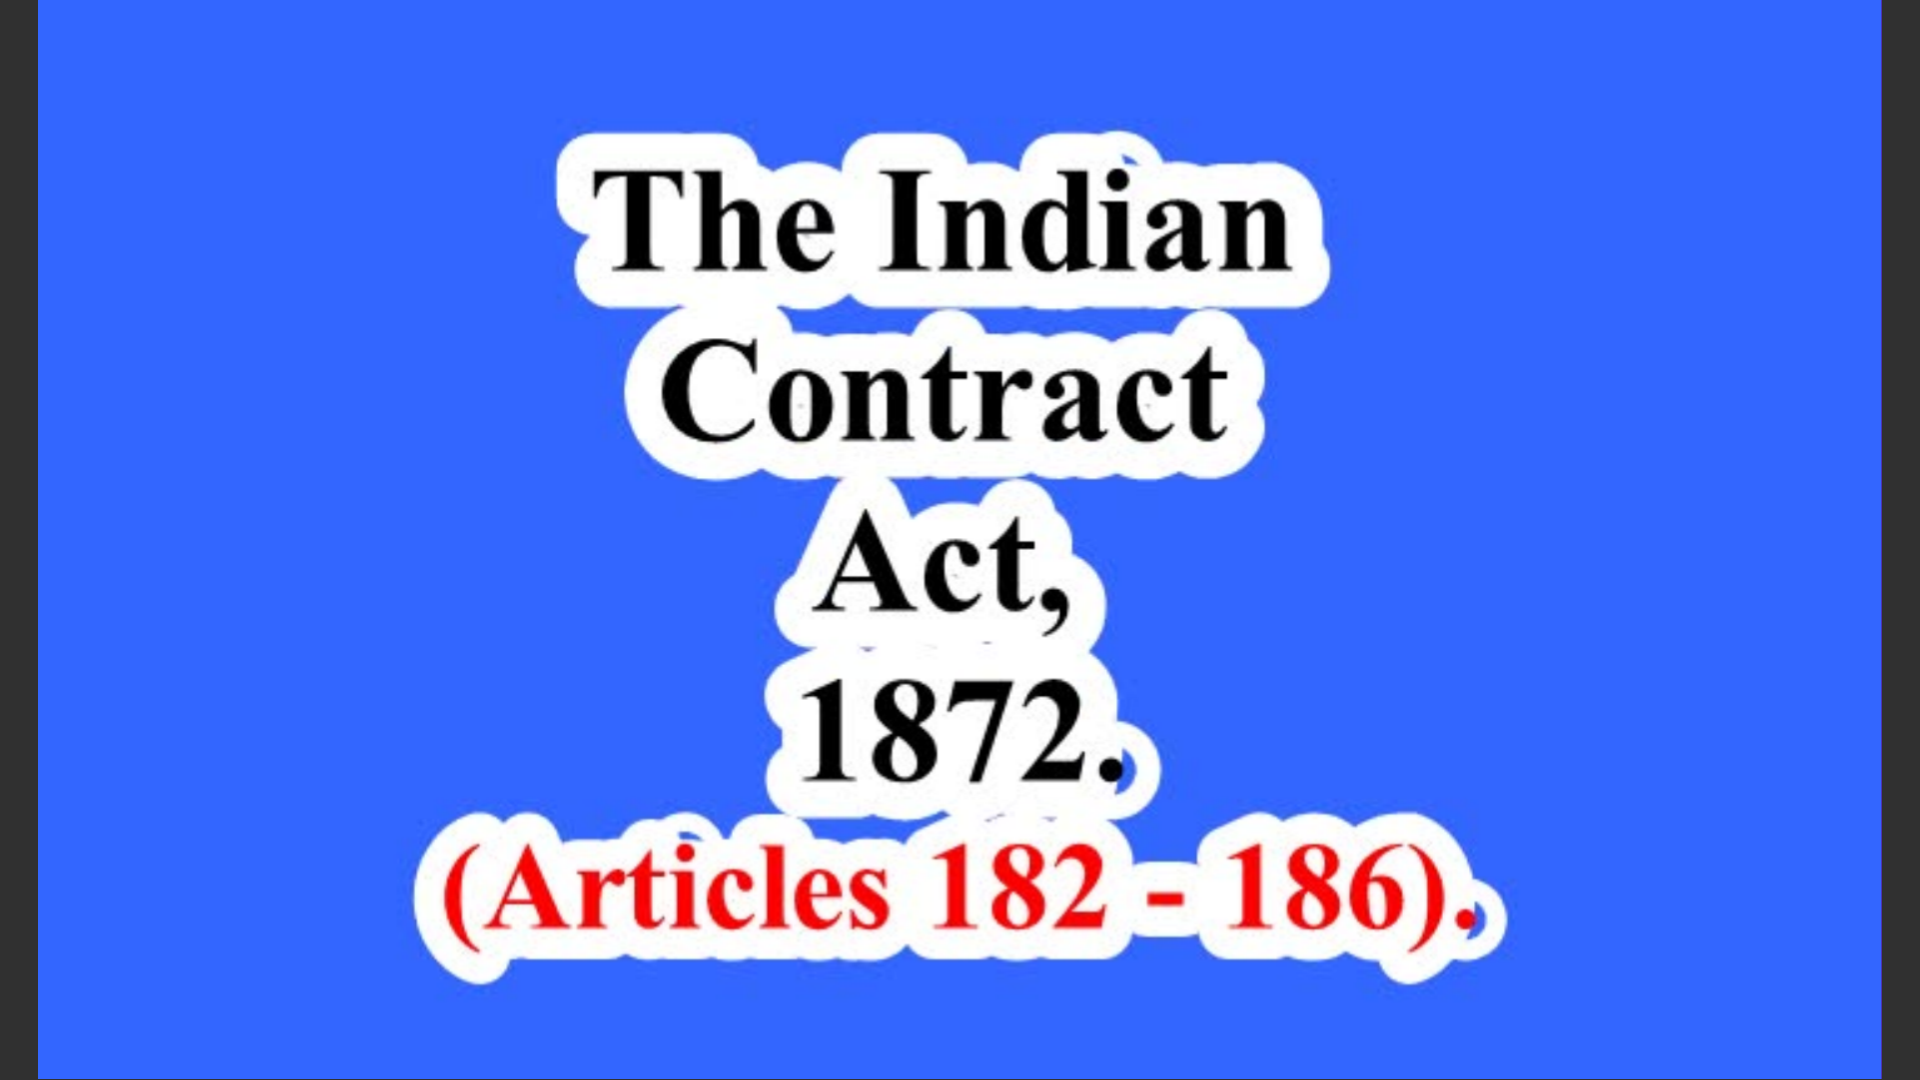 The Indian Contract Act, 1872. (Articles 182 – 186).